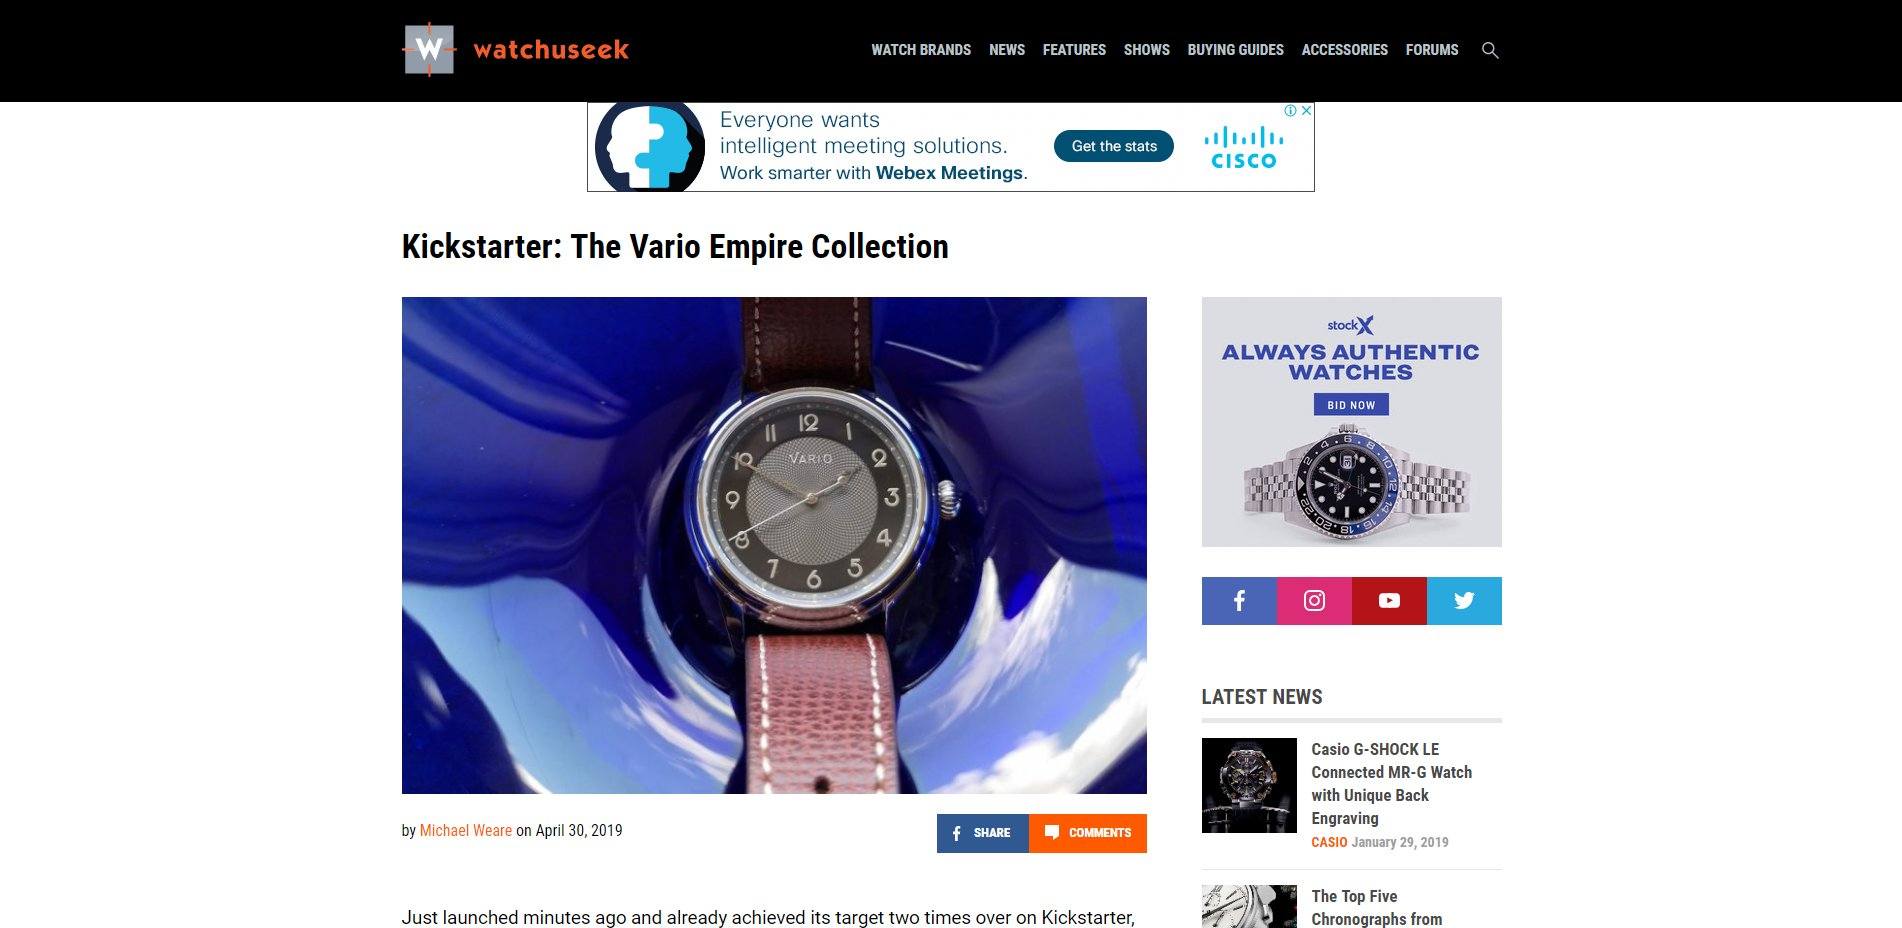 The Vario Empire Collection by WatchUSeek